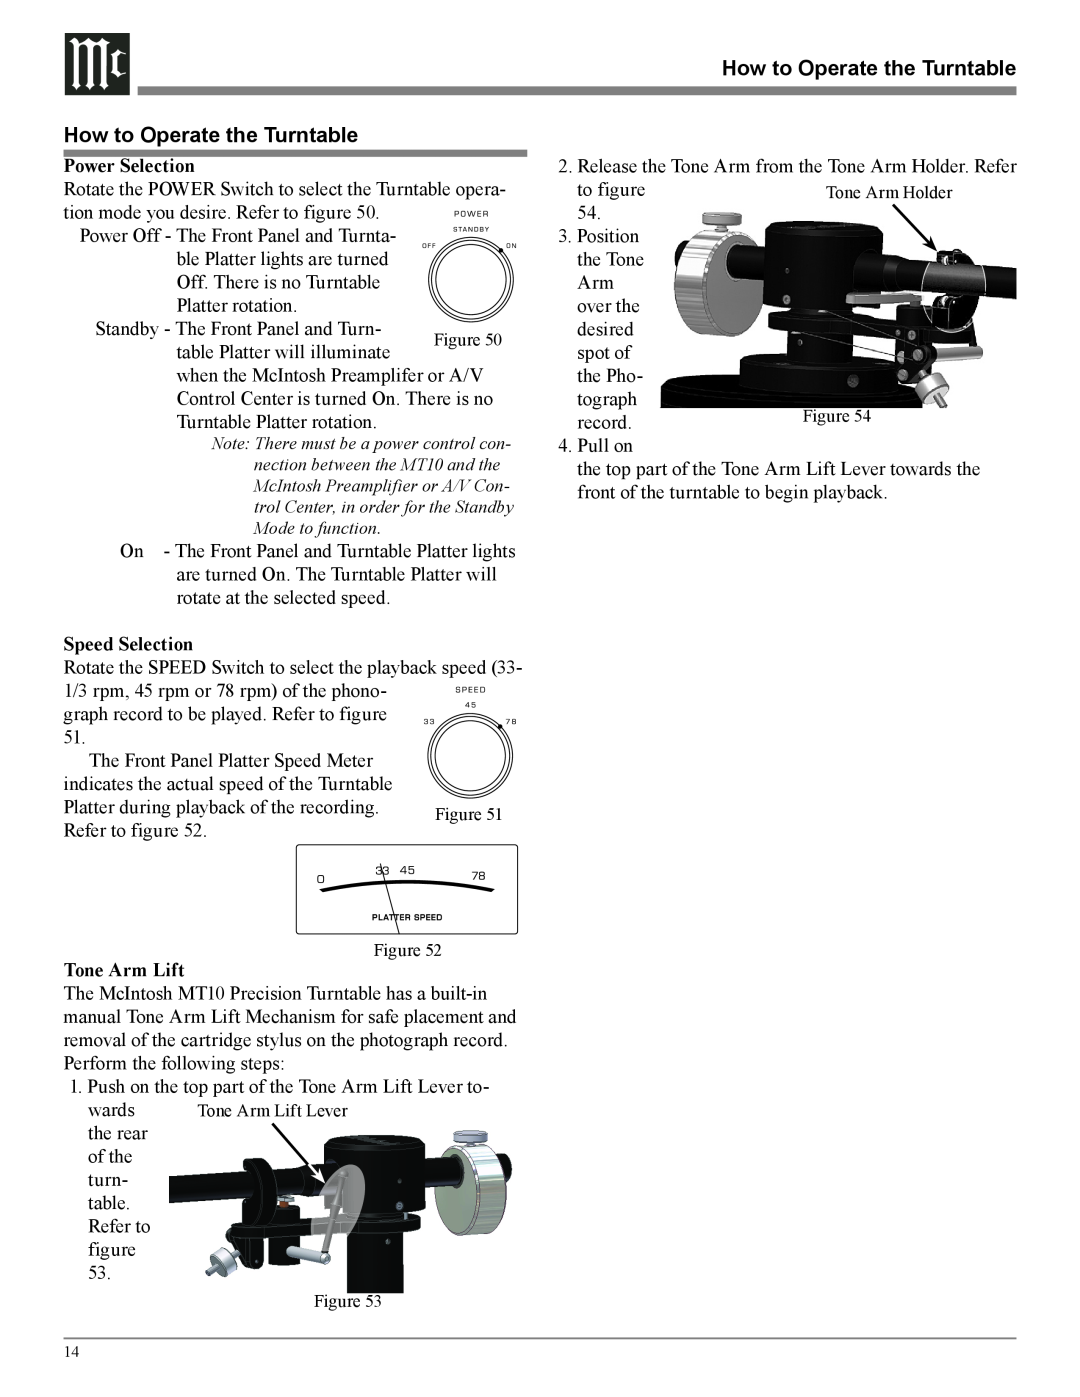 McIntosh MT10 owner manual How to Operate the Turntable, Power Selection, Speed Selection, Tone Arm Lift 